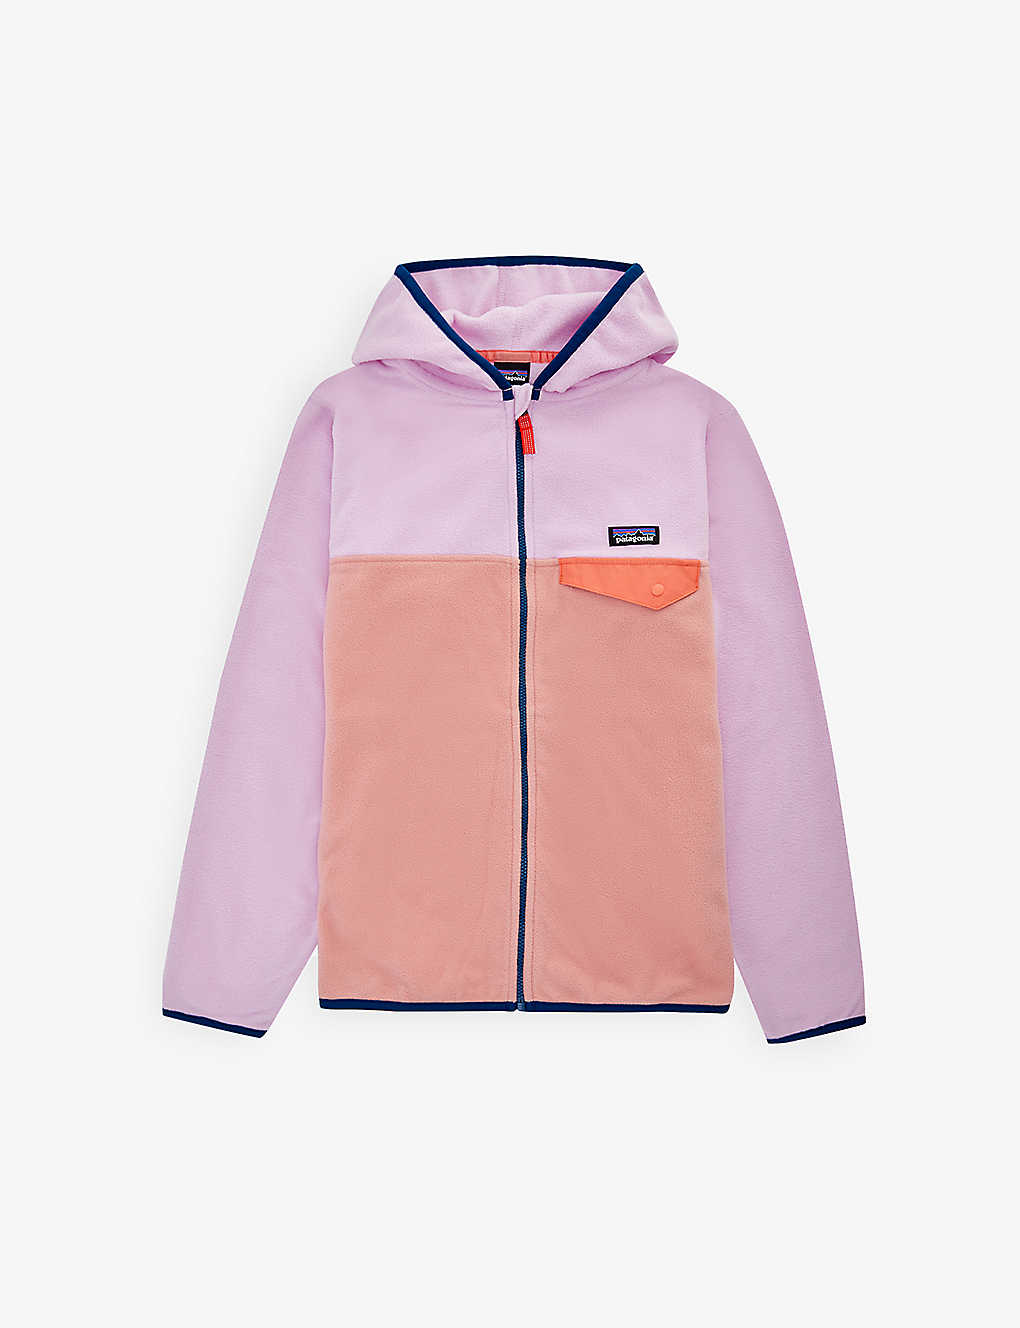 PATAGONIA PATAGONIA BOYS SUN FADE PINK KIDS BRAND APPLIQUÉ COLOUR-BLOCK RECYCLED-POLYESTER HOODY 5-18 YEARS,64712490